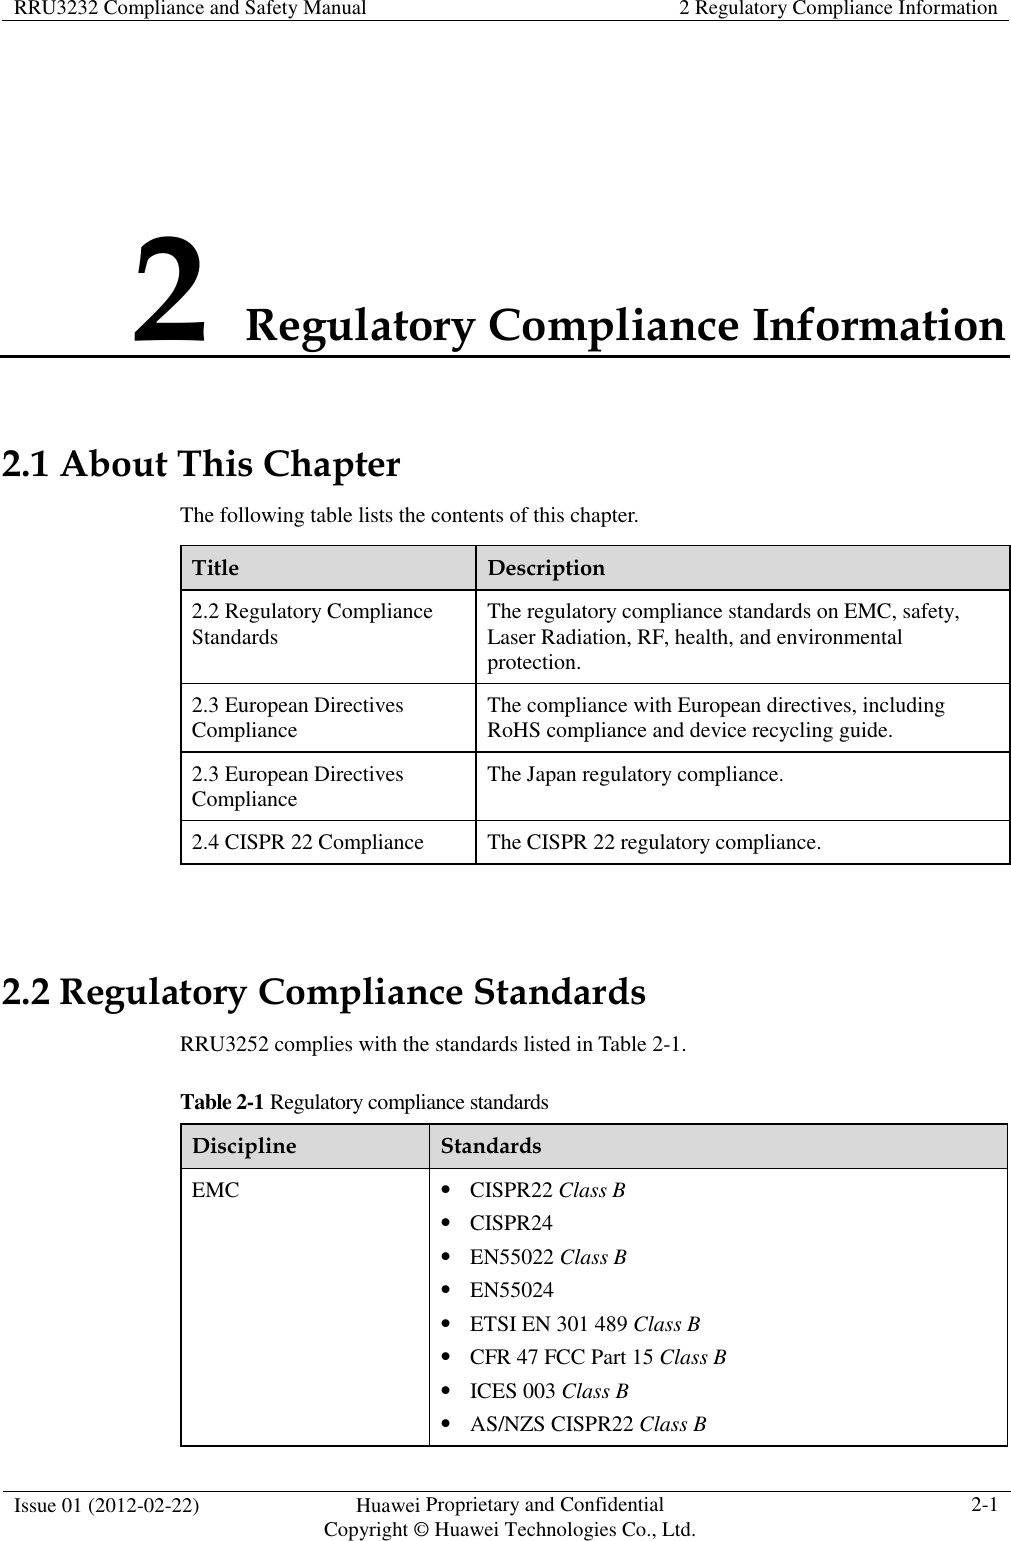 RRU3232 Compliance and Safety Manual  2 Regulatory Compliance Information  Issue 01 (2012-02-22)  Huawei Proprietary and Confidential           Copyright © Huawei Technologies Co., Ltd. 2-1  2 Regulatory Compliance Information 2.1 About This Chapter The following table lists the contents of this chapter. Title  Description 2.2 Regulatory Compliance Standards  The regulatory compliance standards on EMC, safety, Laser Radiation, RF, health, and environmental protection. 2.3 European Directives Compliance  The compliance with European directives, including RoHS compliance and device recycling guide. 2.3 European Directives Compliance    The Japan regulatory compliance. 2.4 CISPR 22 Compliance  The CISPR 22 regulatory compliance.  2.2 Regulatory Compliance Standards RRU3252 complies with the standards listed in Table 2-1. Table 2-1 Regulatory compliance standards Discipline  Standards EMC  CISPR22 Class B  CISPR24  EN55022 Class B  EN55024  ETSI EN 301 489 Class B  CFR 47 FCC Part 15 Class B  ICES 003 Class B  AS/NZS CISPR22 Class B 